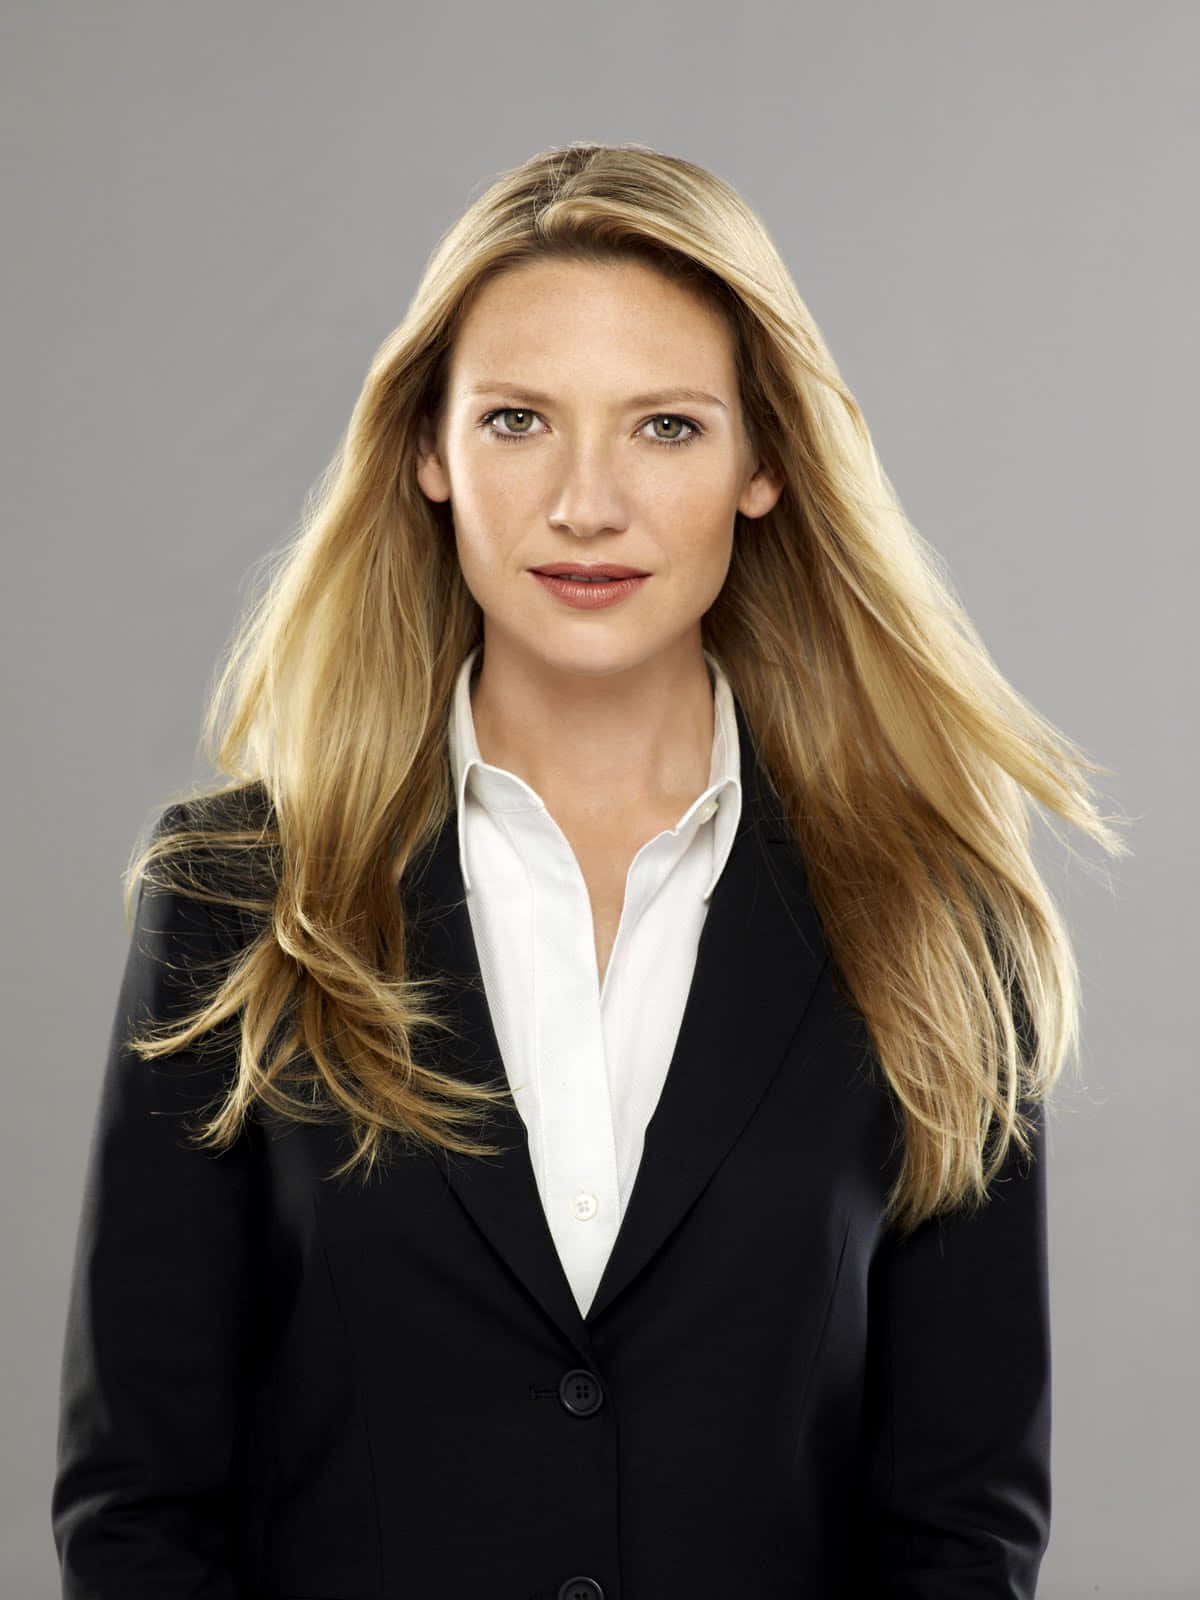 Anna Torv Striking A Graceful Pose In An Alluring Black Outfit